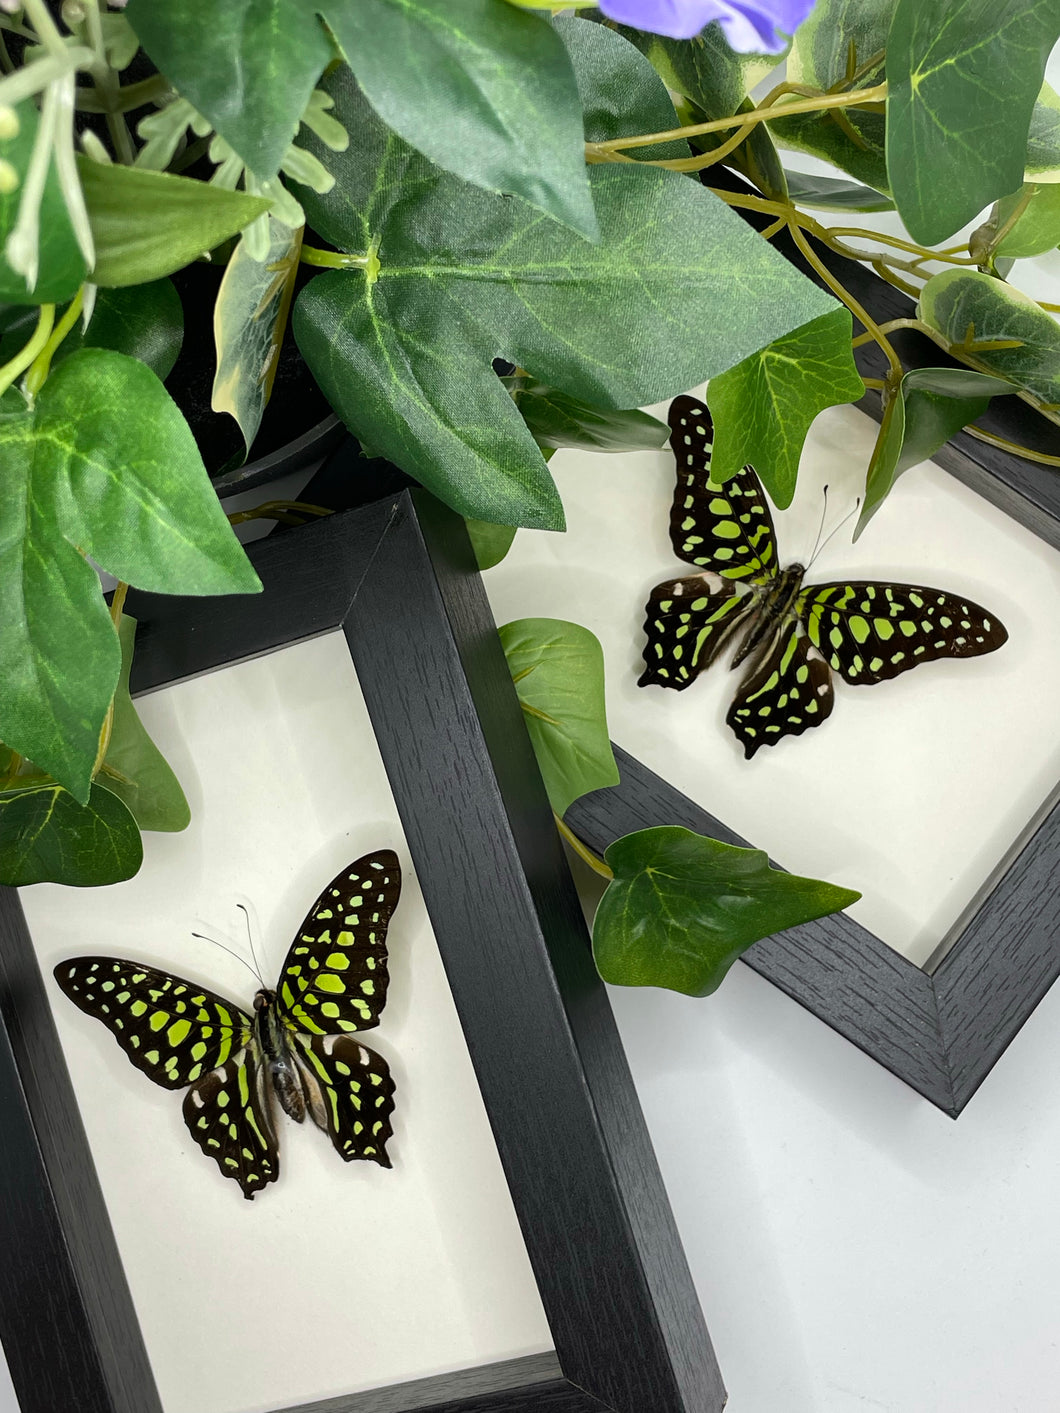 Tailed Jay butterfly / Graphium Agamemnon in a frame